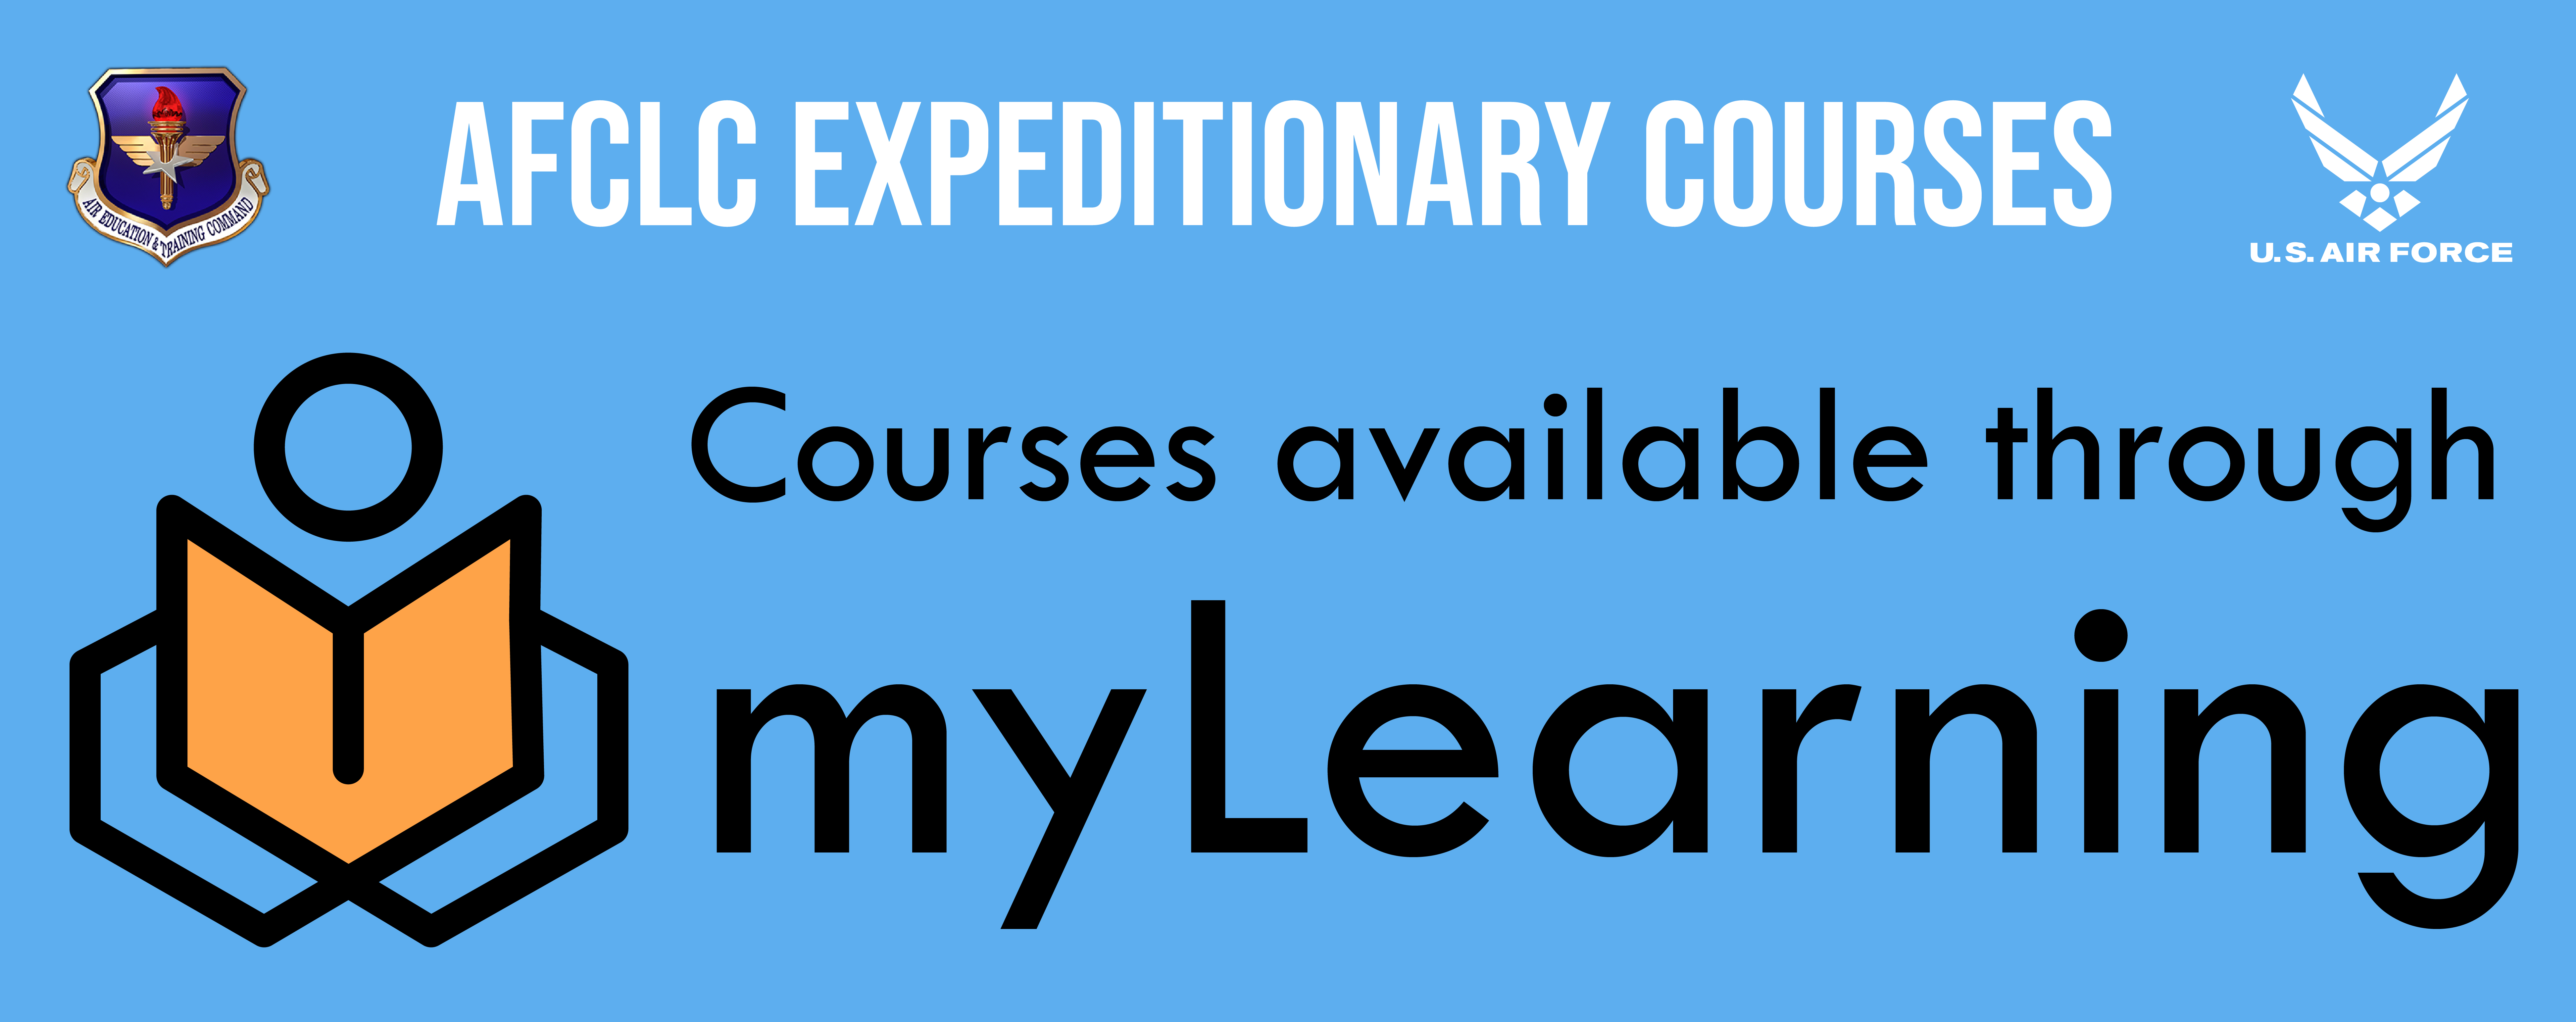 AFCLC Expeditionary Courses - Courses available through myLearning